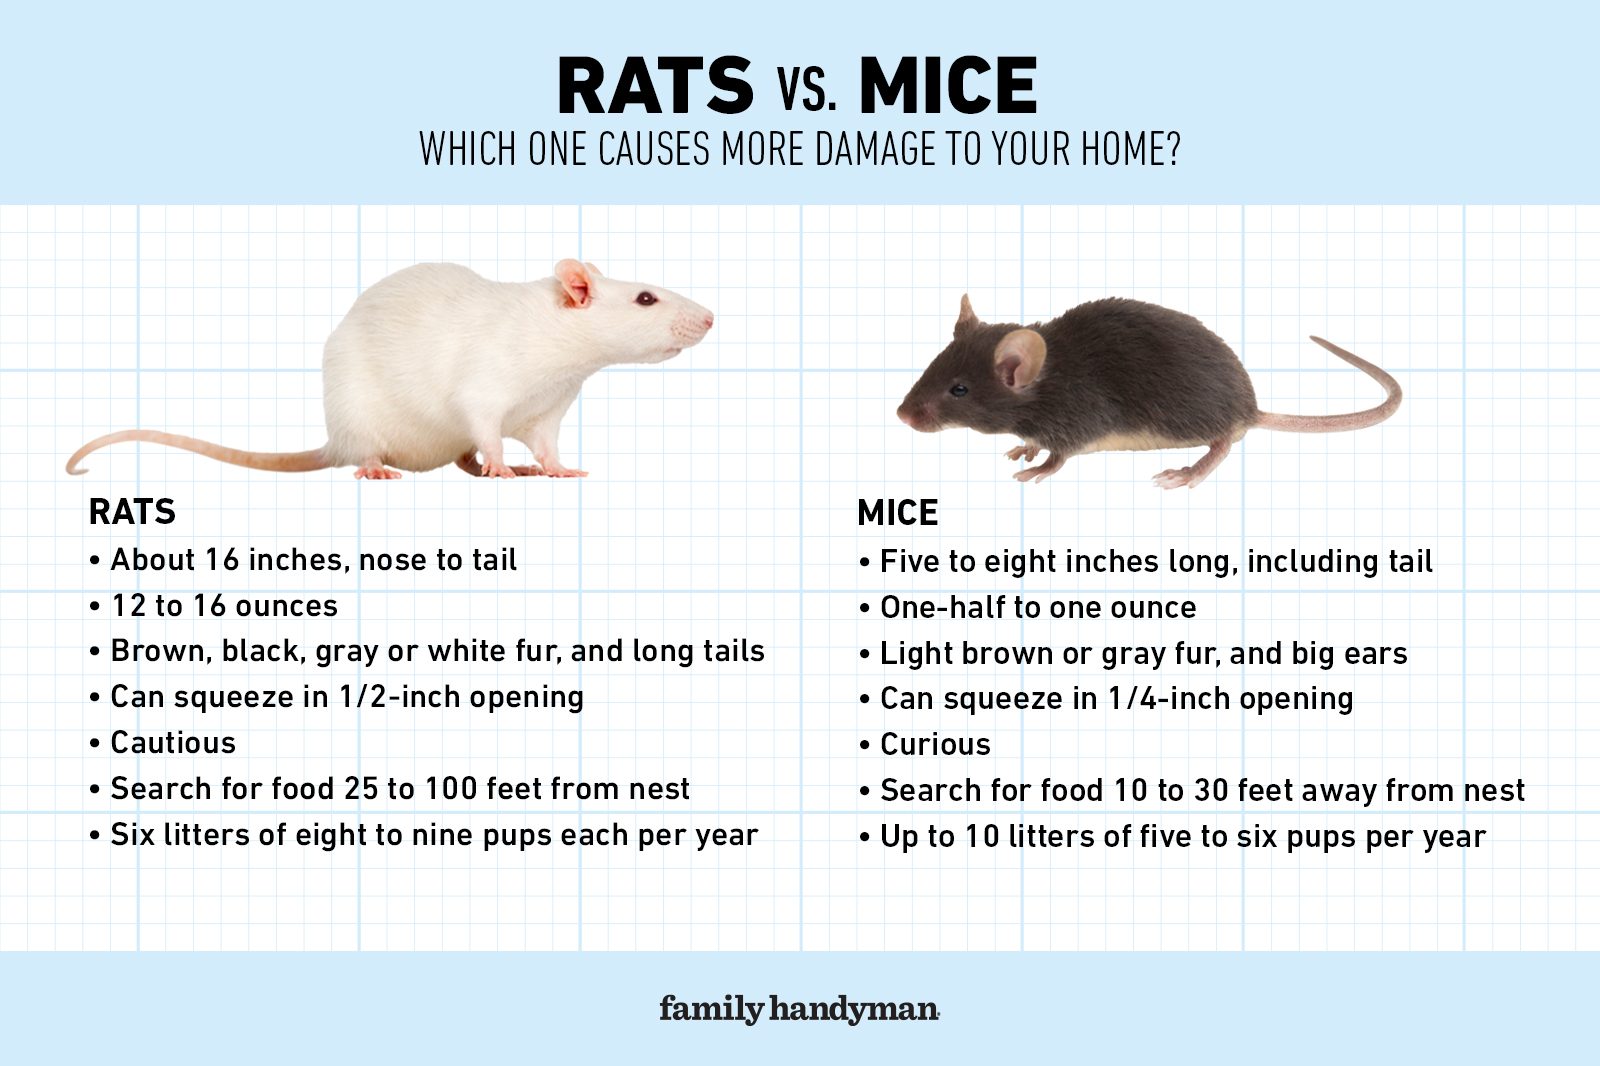 https://www.familyhandyman.com/wp-content/uploads/2022/09/FHM-Rats-vs.-Mice-Which-One-Causes-More-Damage-To-Your-Home-GettyImages2.jpg?fit=680%2C453